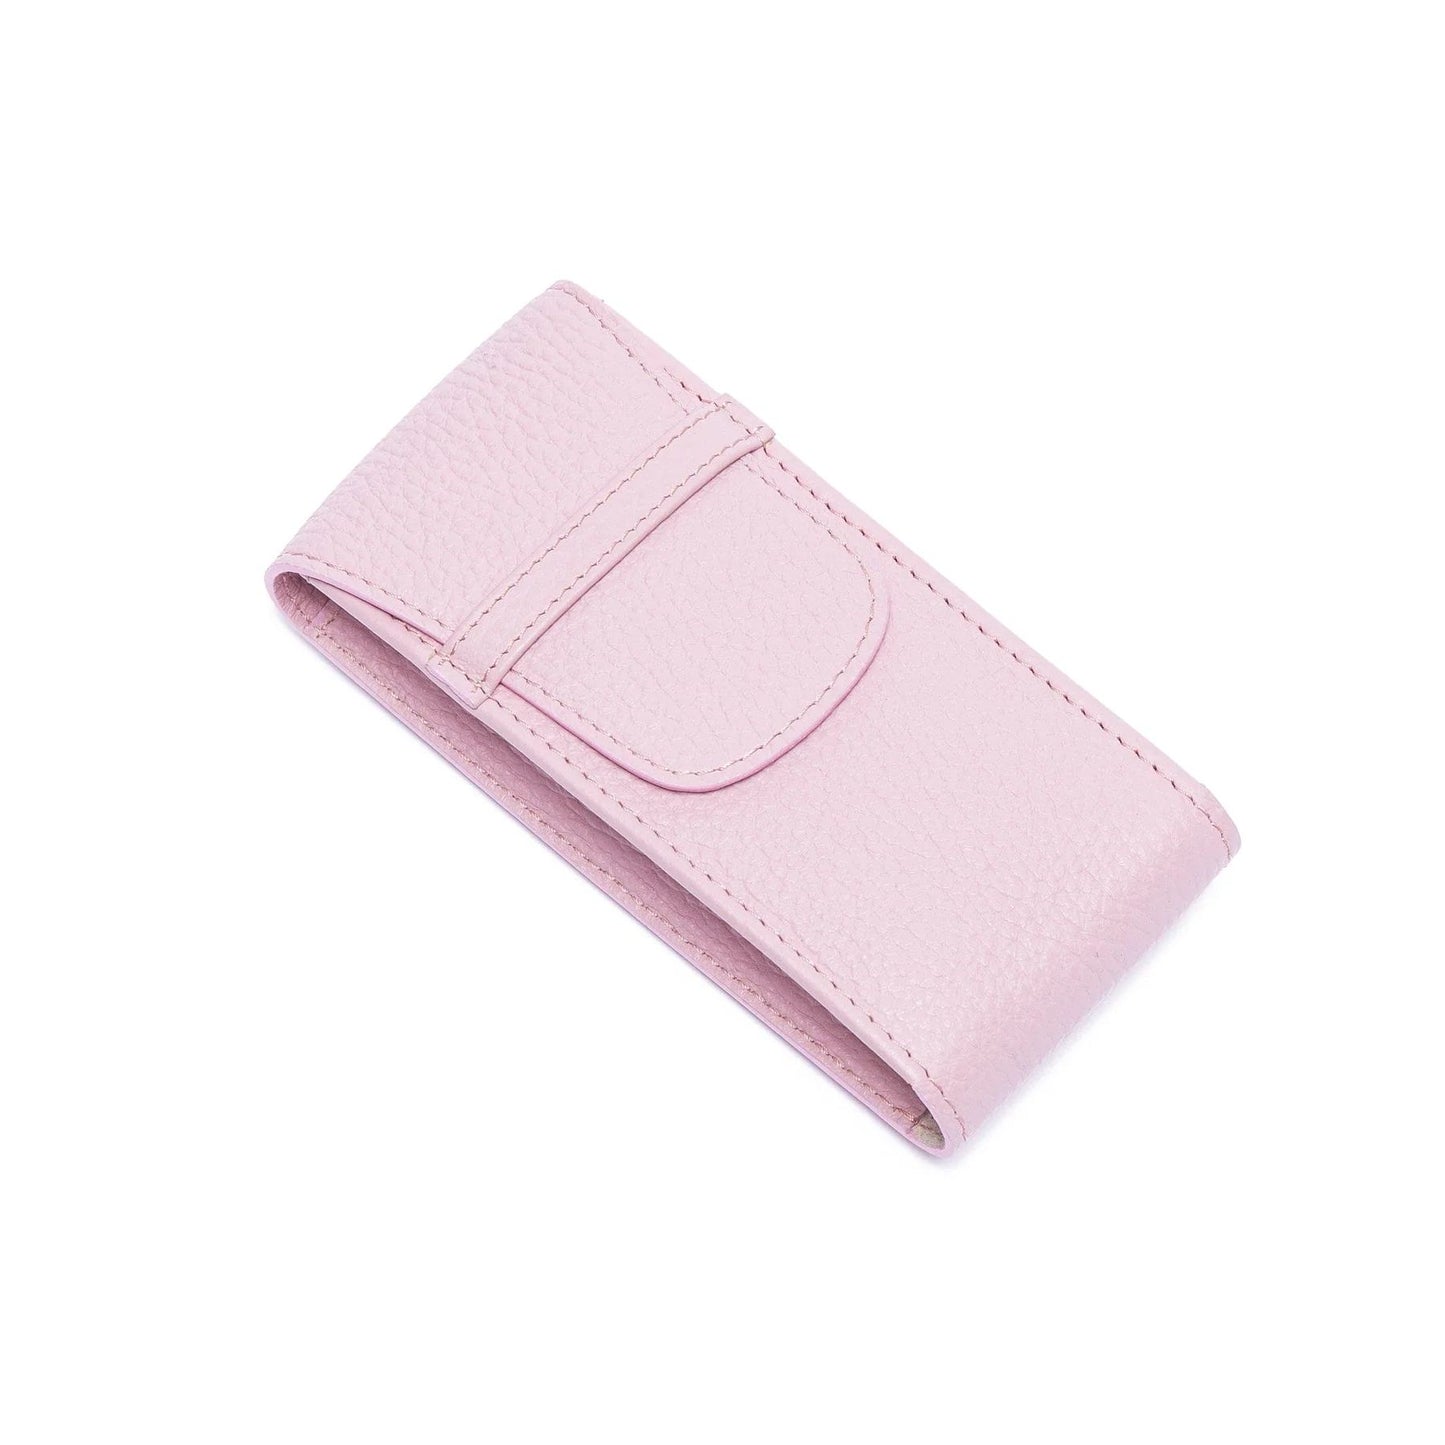 Portobello leather 1 Watch Pouch - Pink